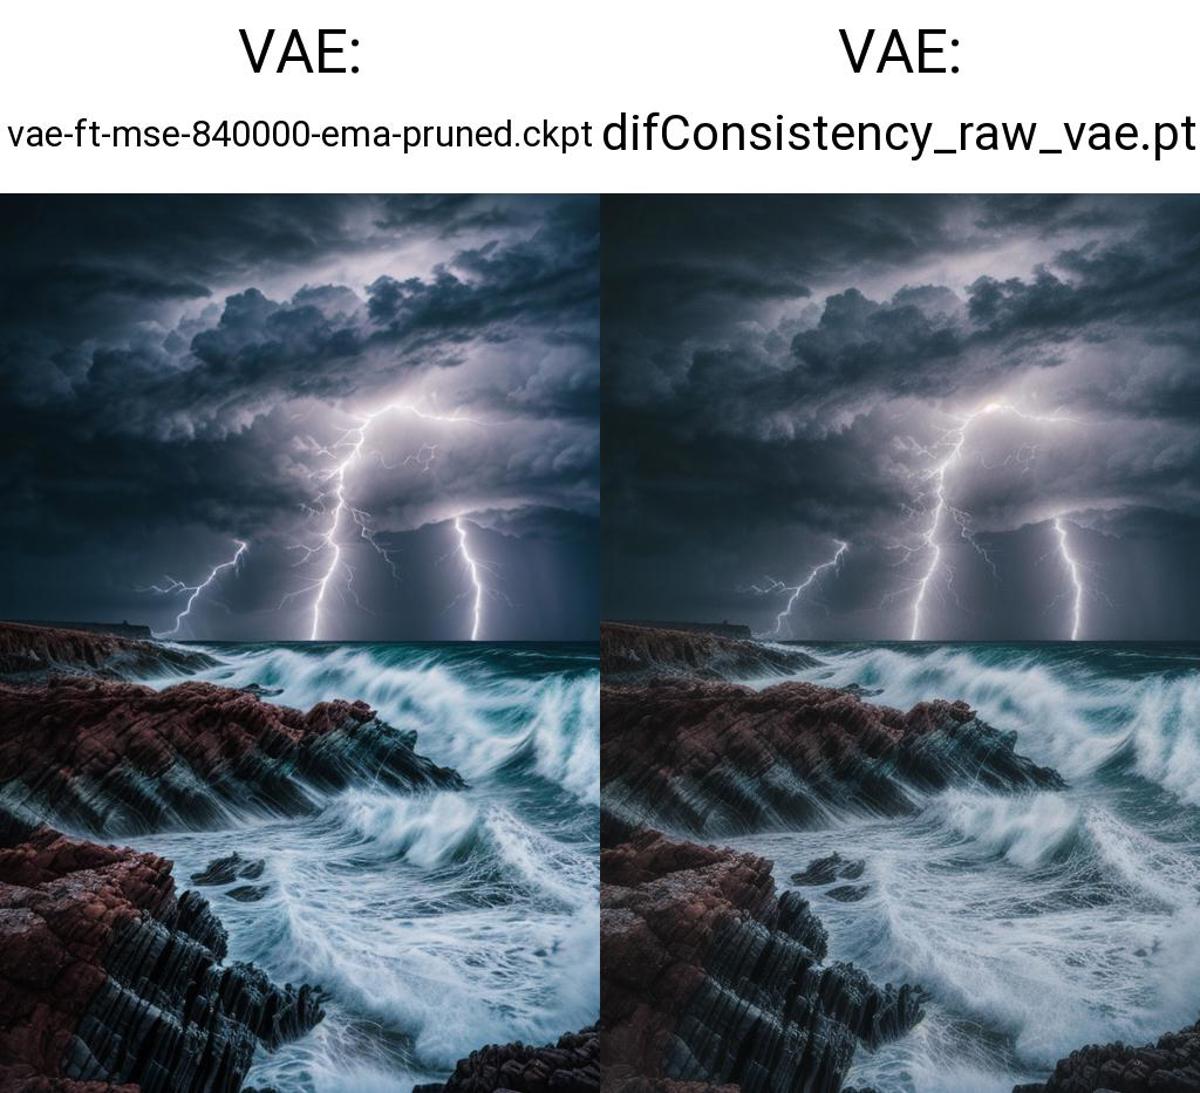 difConsistency RAW VAE (Pack) image by rMada